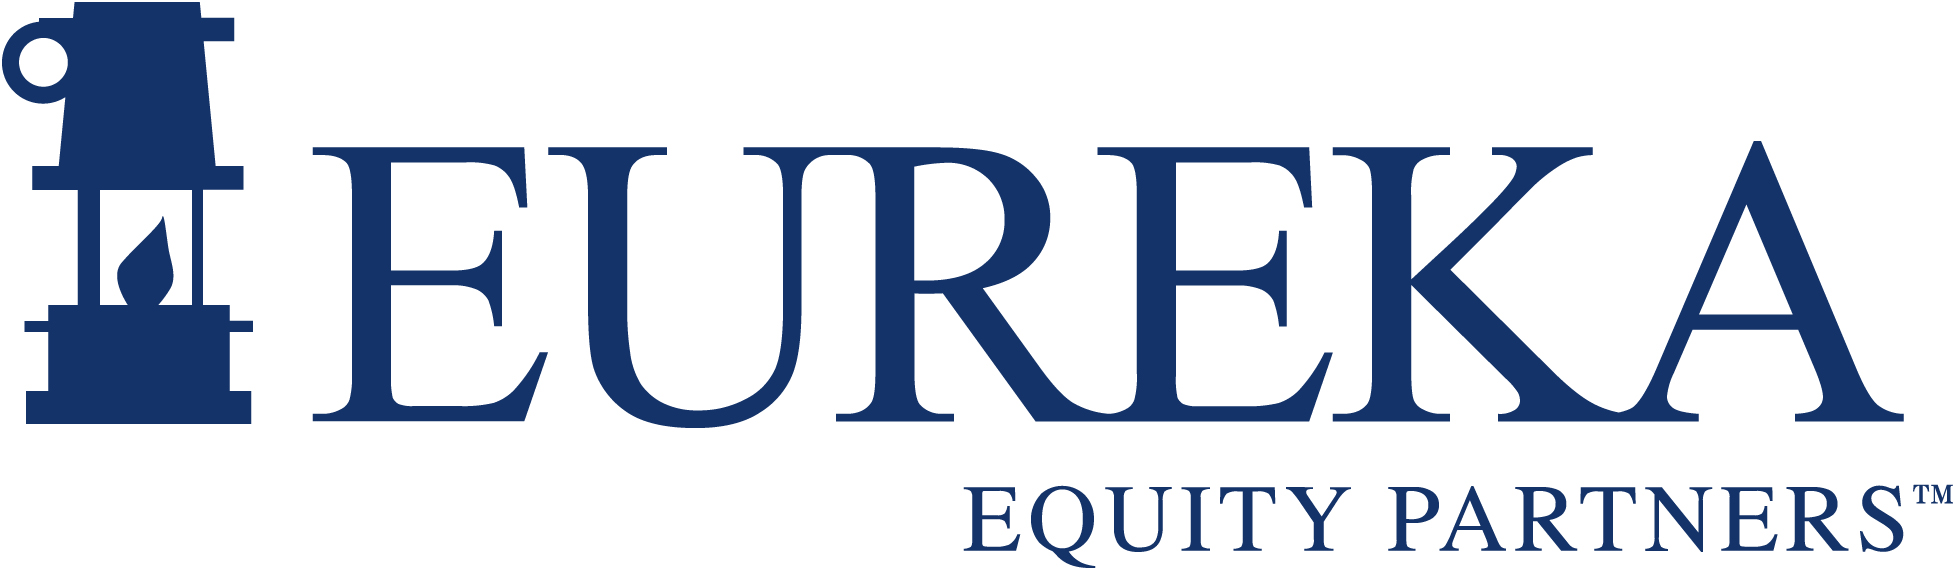 Logo Redesign Navy | Private Equity | Eureka Equity Partners